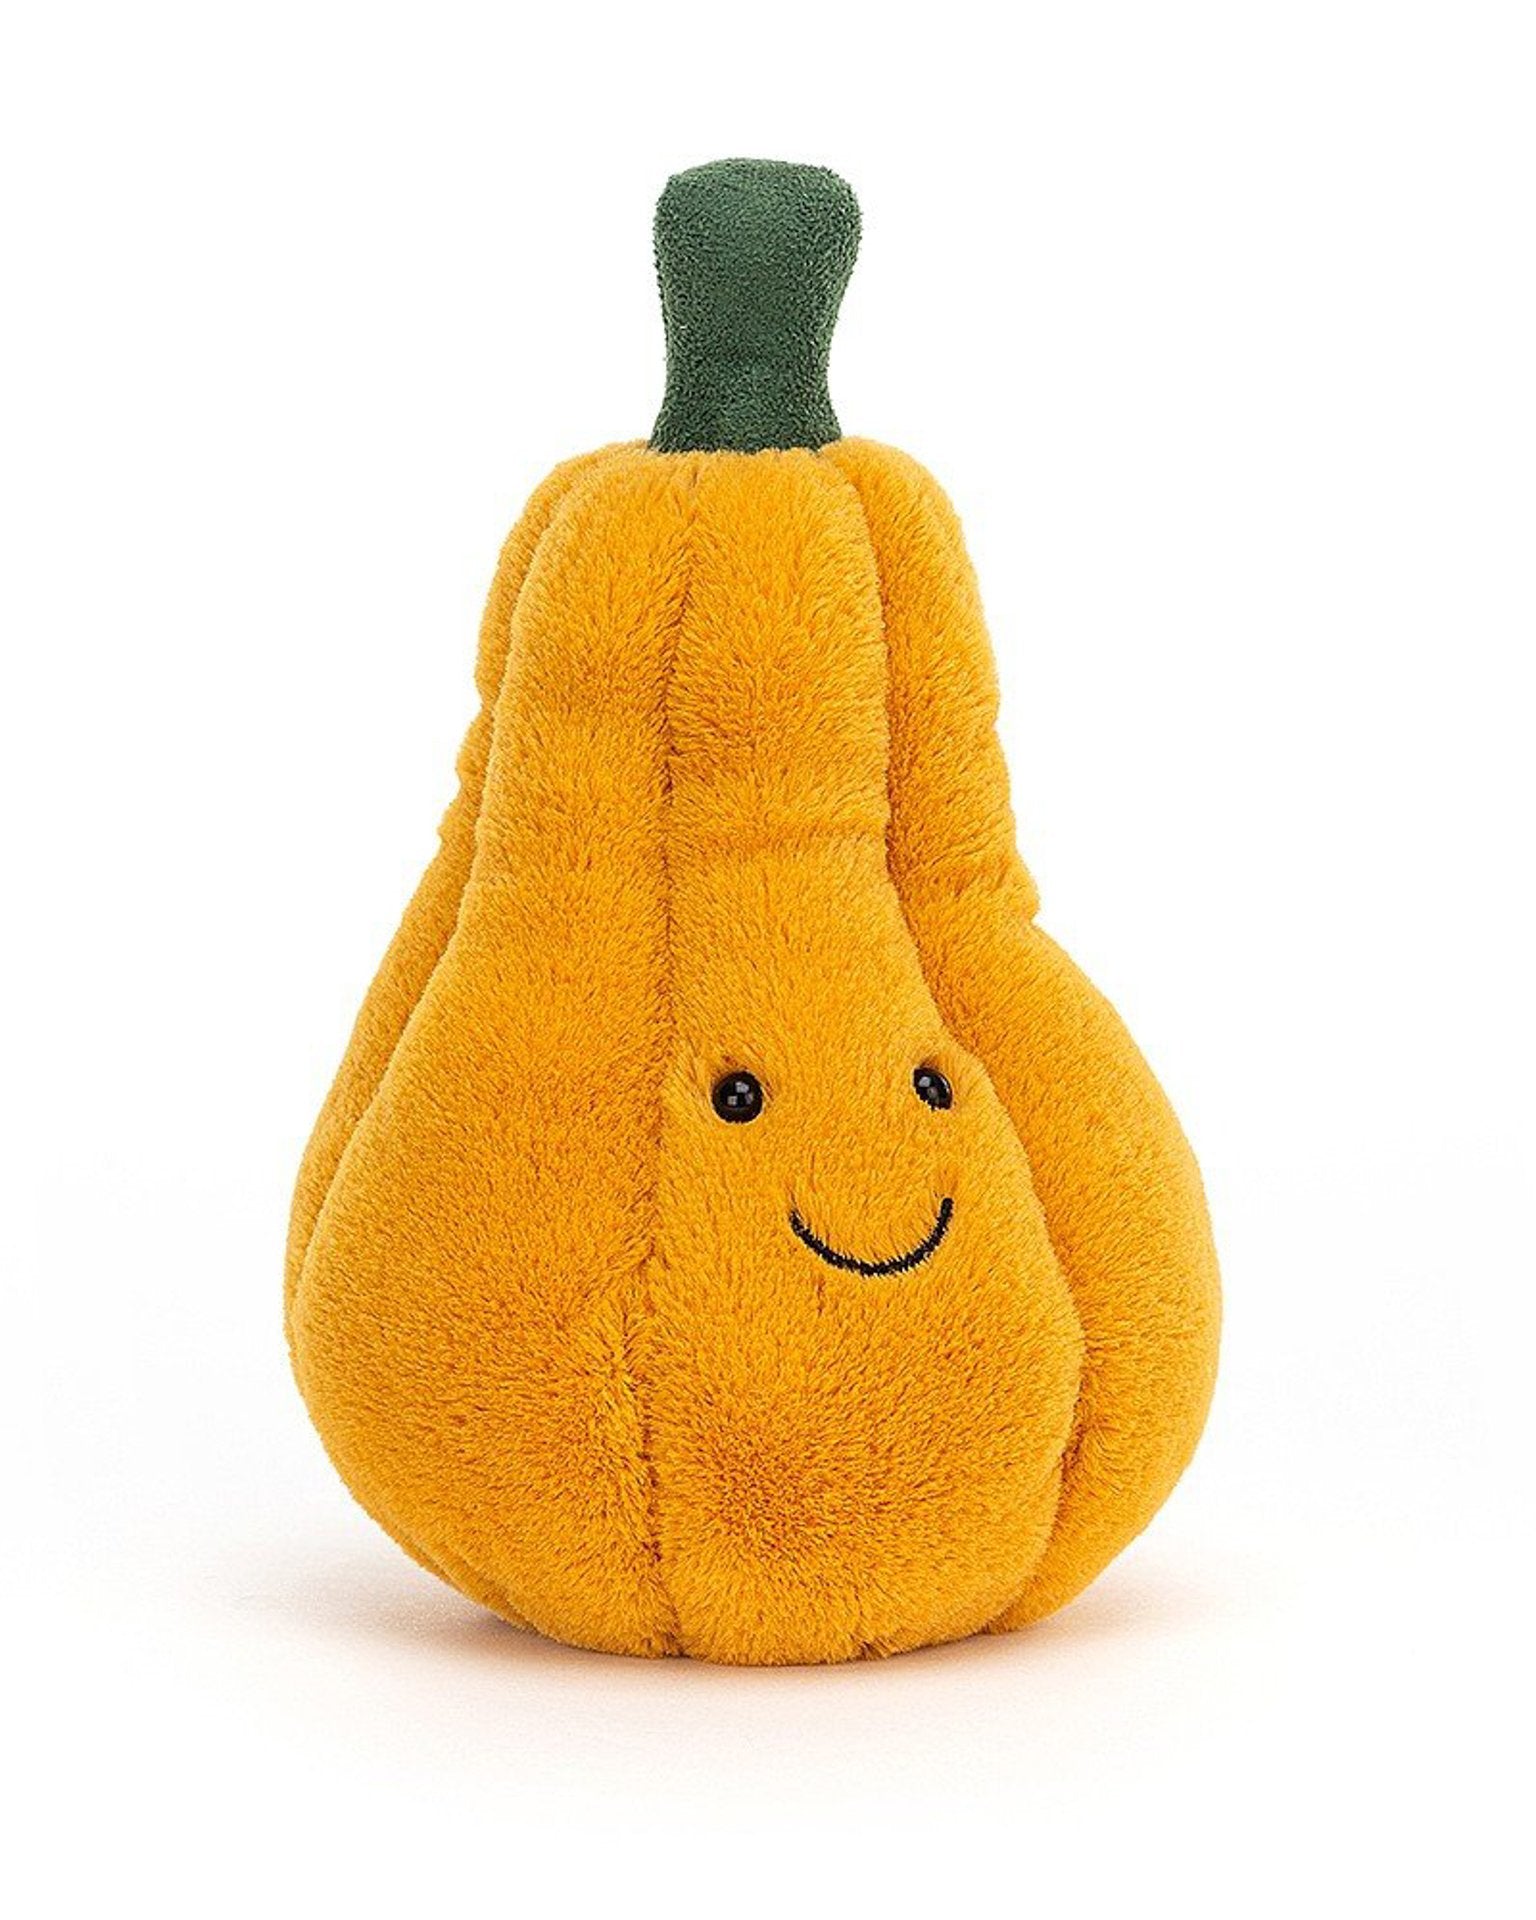 Little jellycat play squishy squash yellow